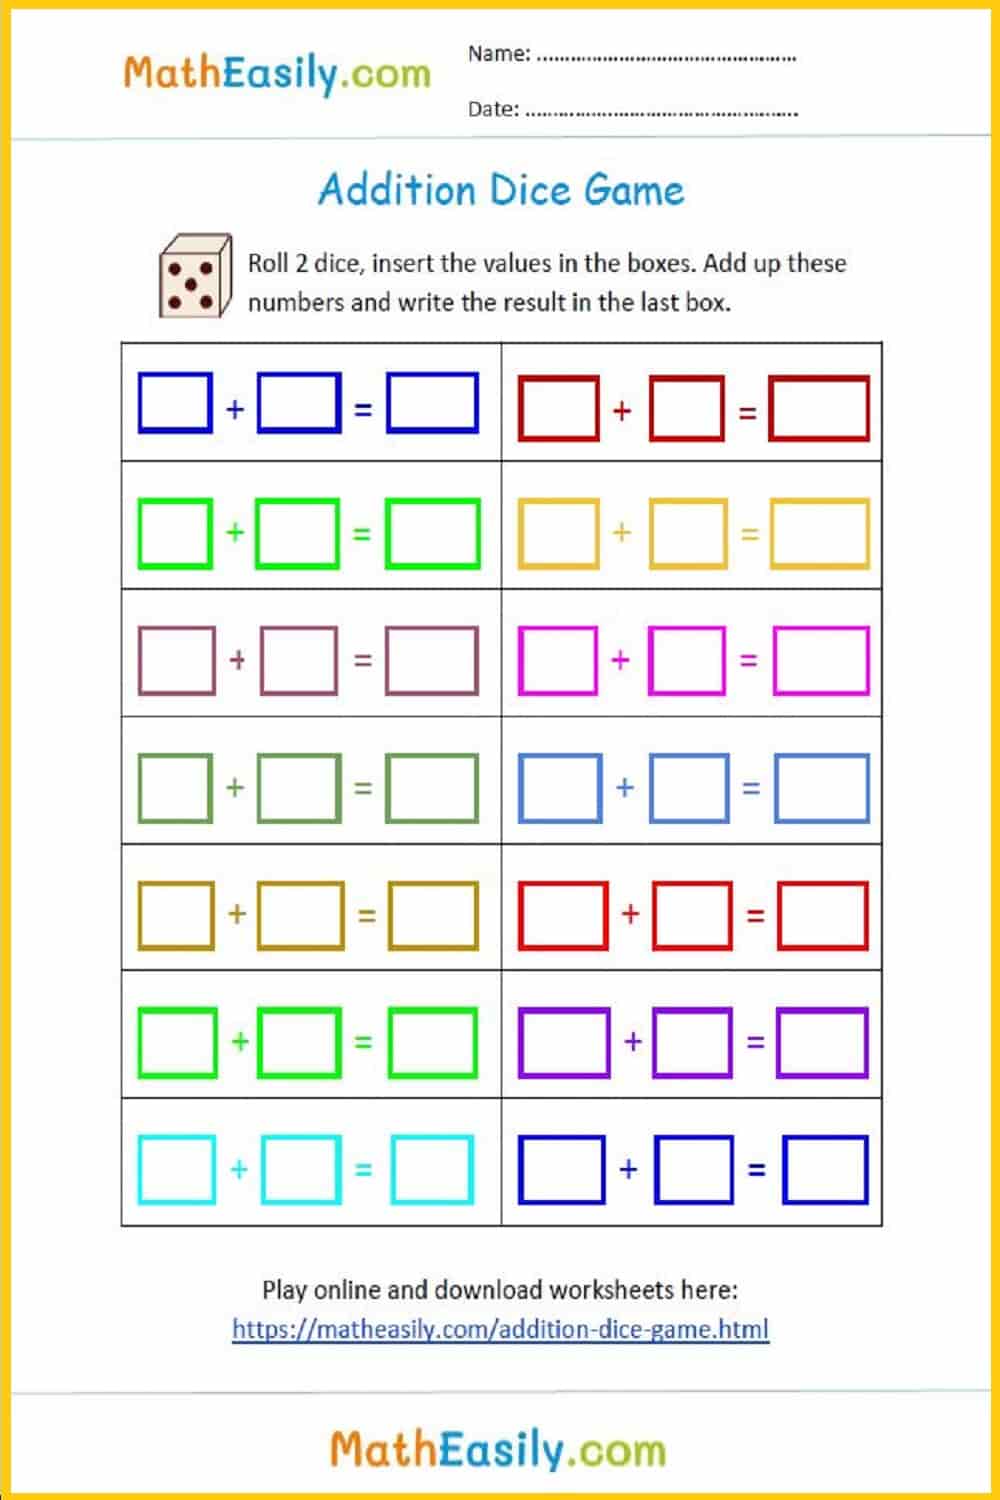 Addition dice games printables. Dice addition worksheet pdf. Download our free printable addition dice worksheet in PDF. 
addition dice worksheets PDF. printable dice games PDF. free printable math dice games pdf. dice math worksheet. 
free printable dice addition worksheets. roll dice addition worksheet.